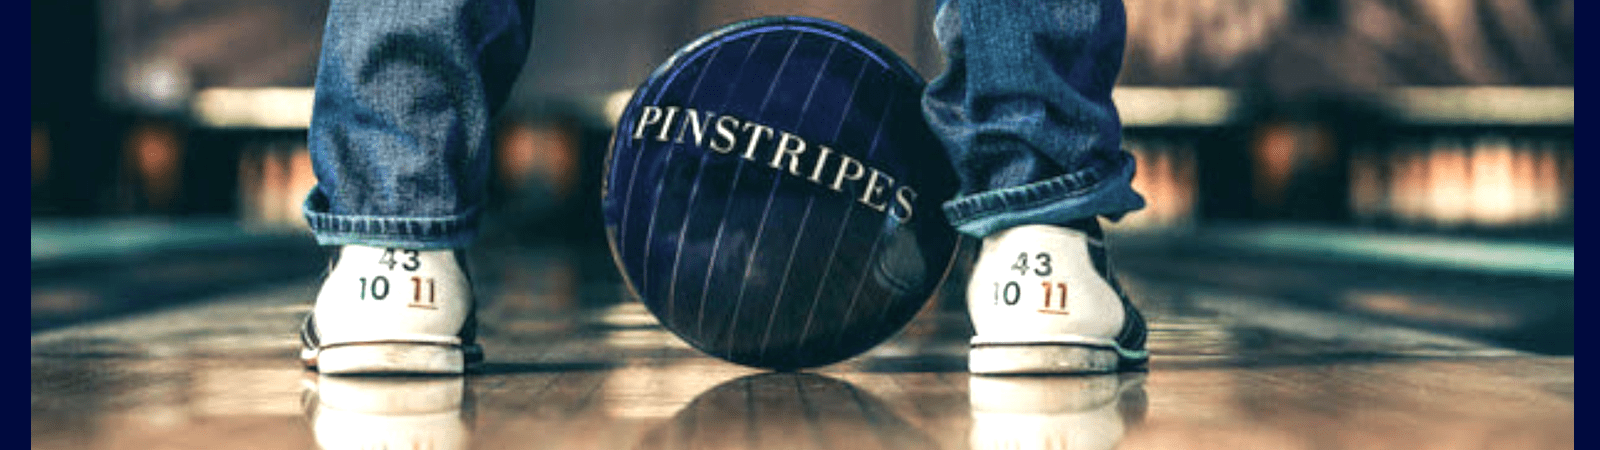 pinstripes-for-email